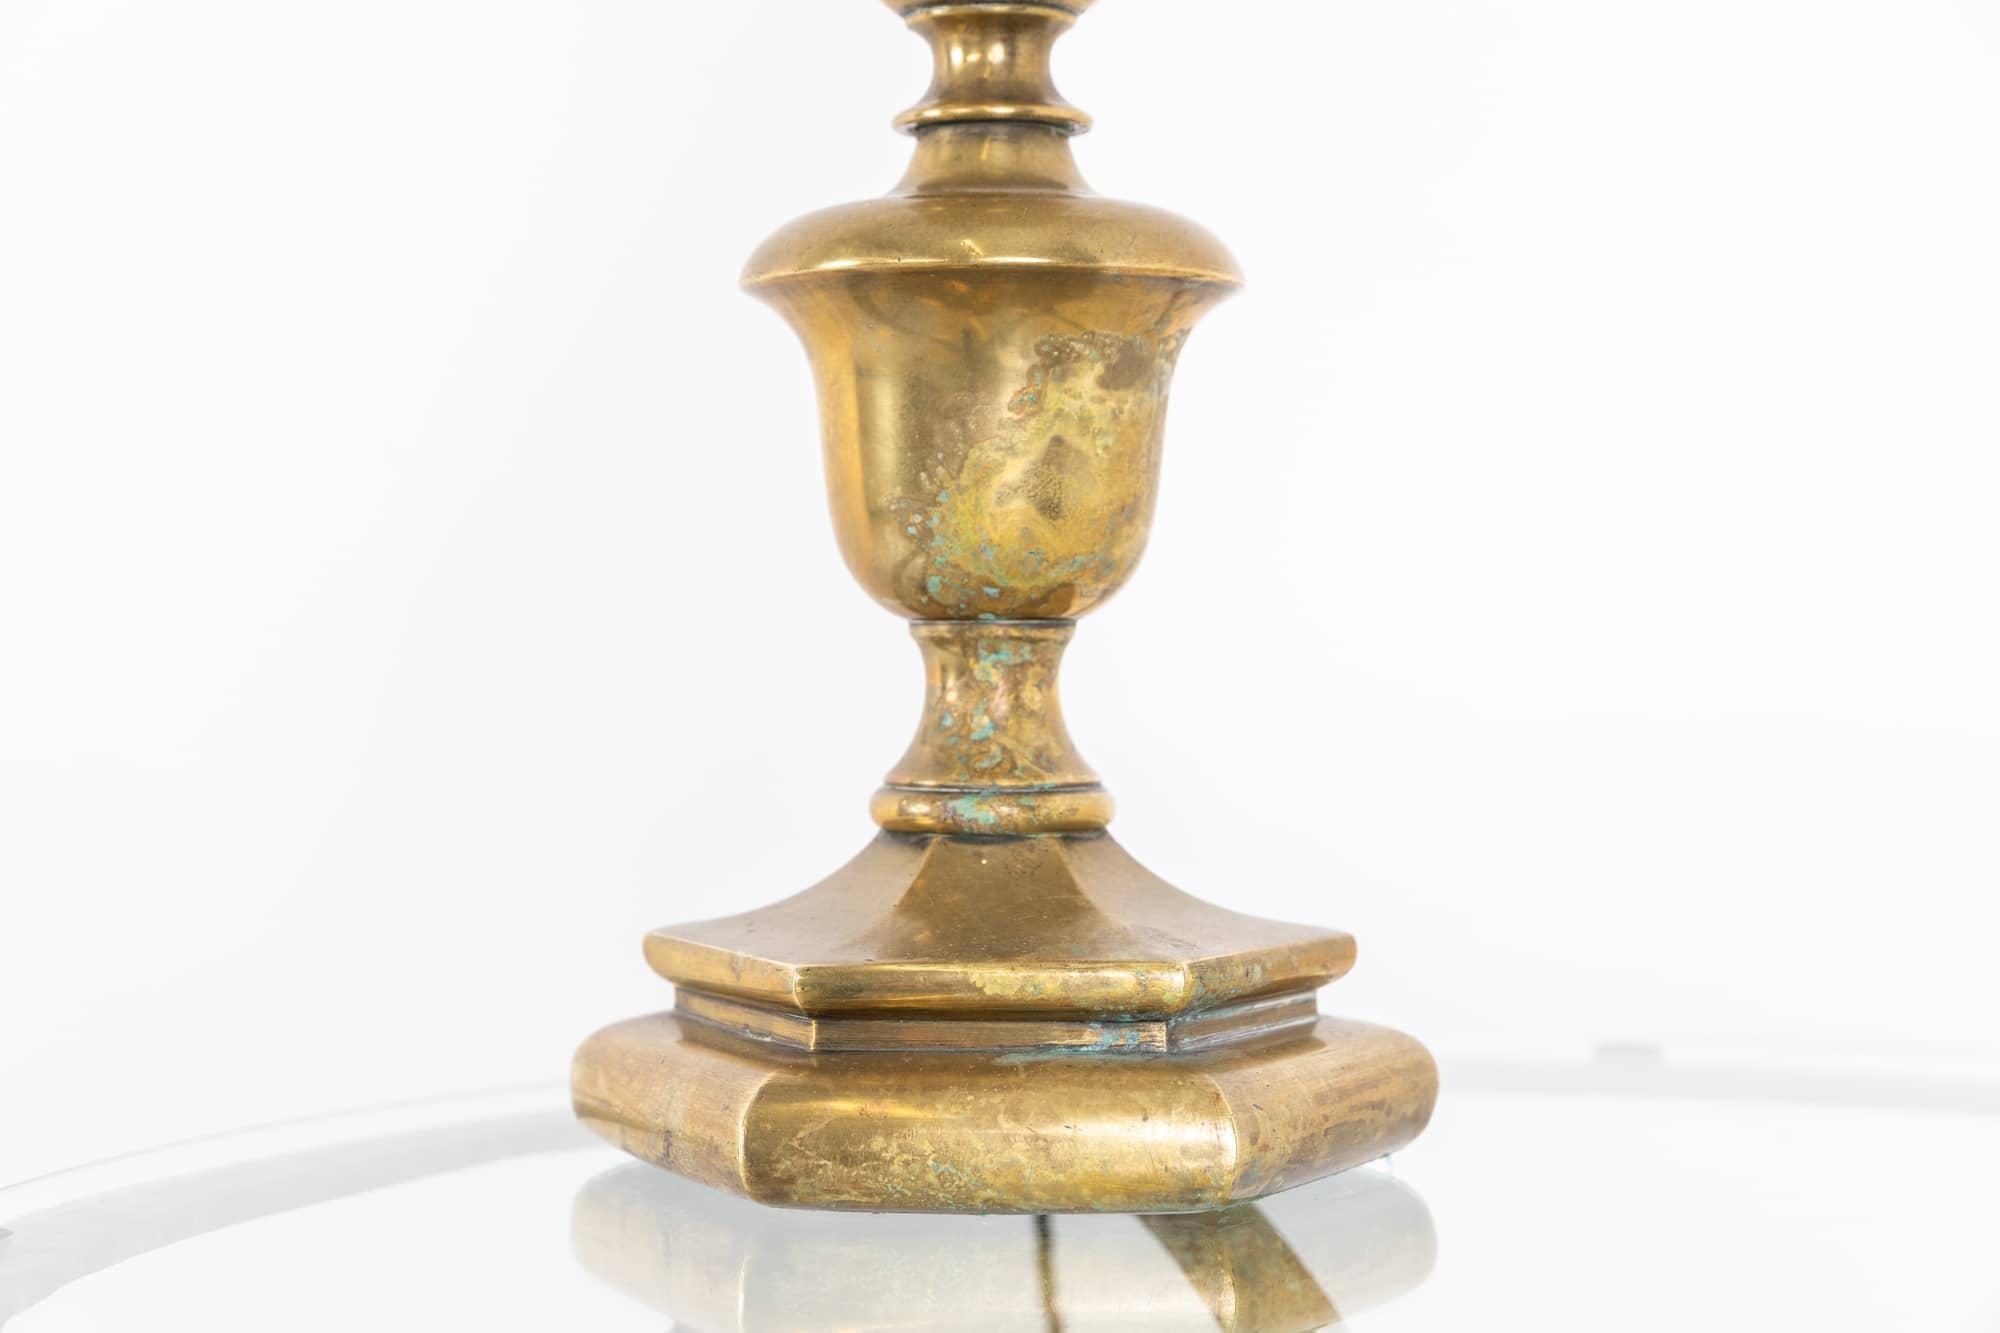 Antique Vintage Edwardian Brass Column Desk Table Lamp. c.1900 In Fair Condition For Sale In London, GB